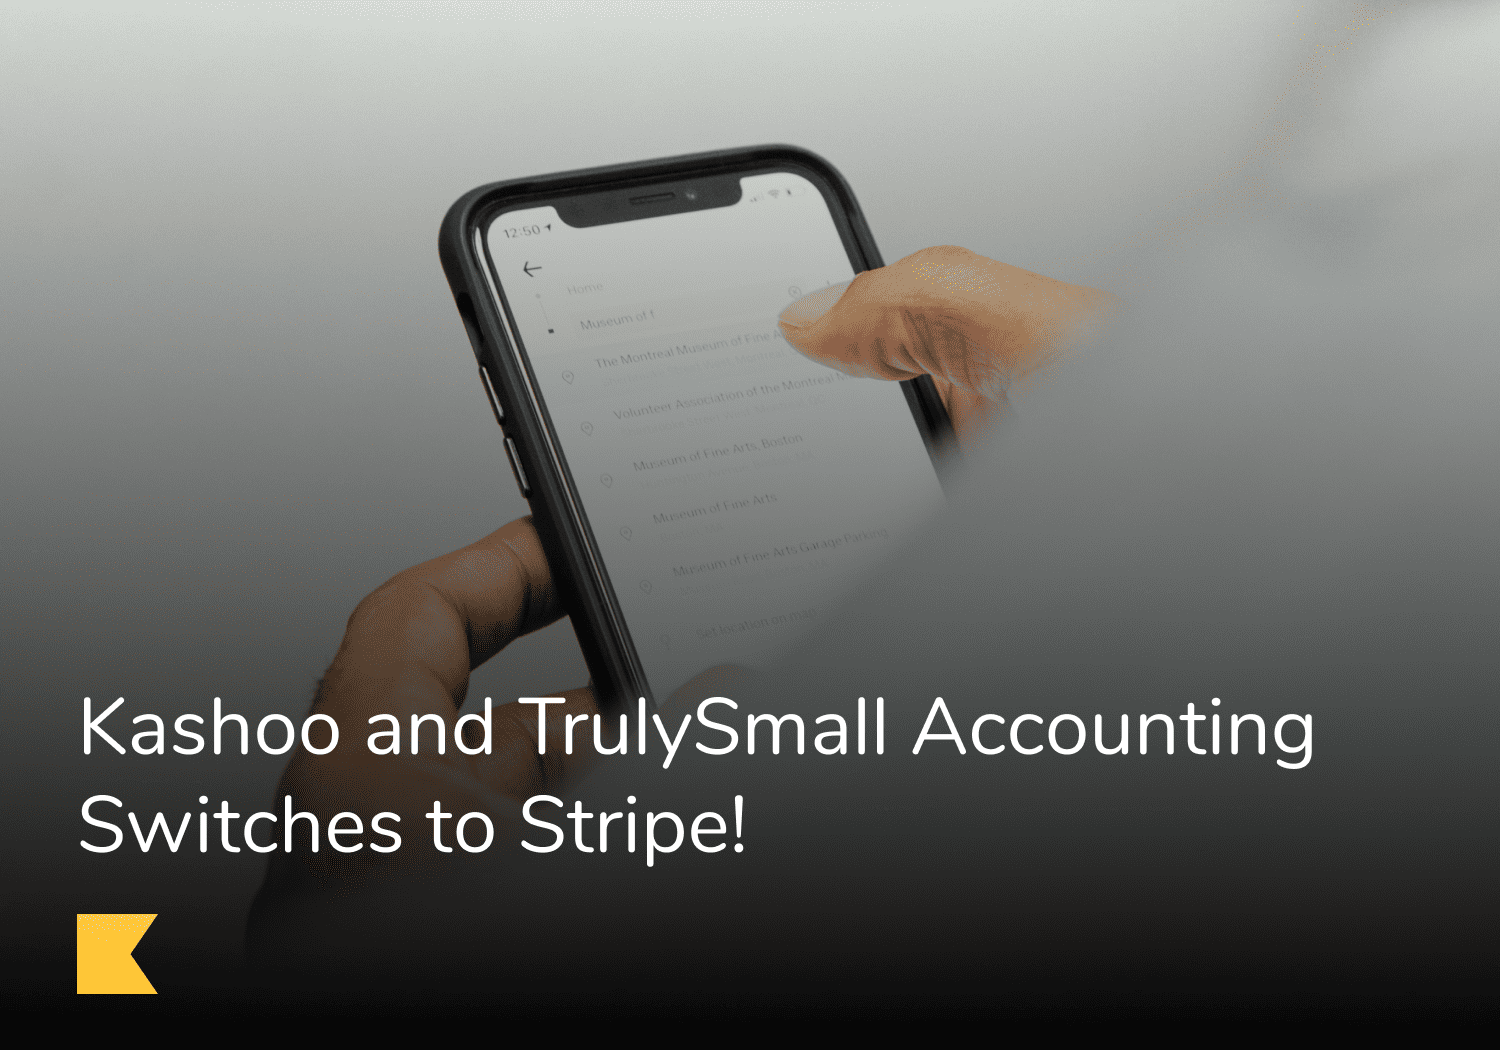 Kashoo and TrulySmall Accounting Switches to Stripe